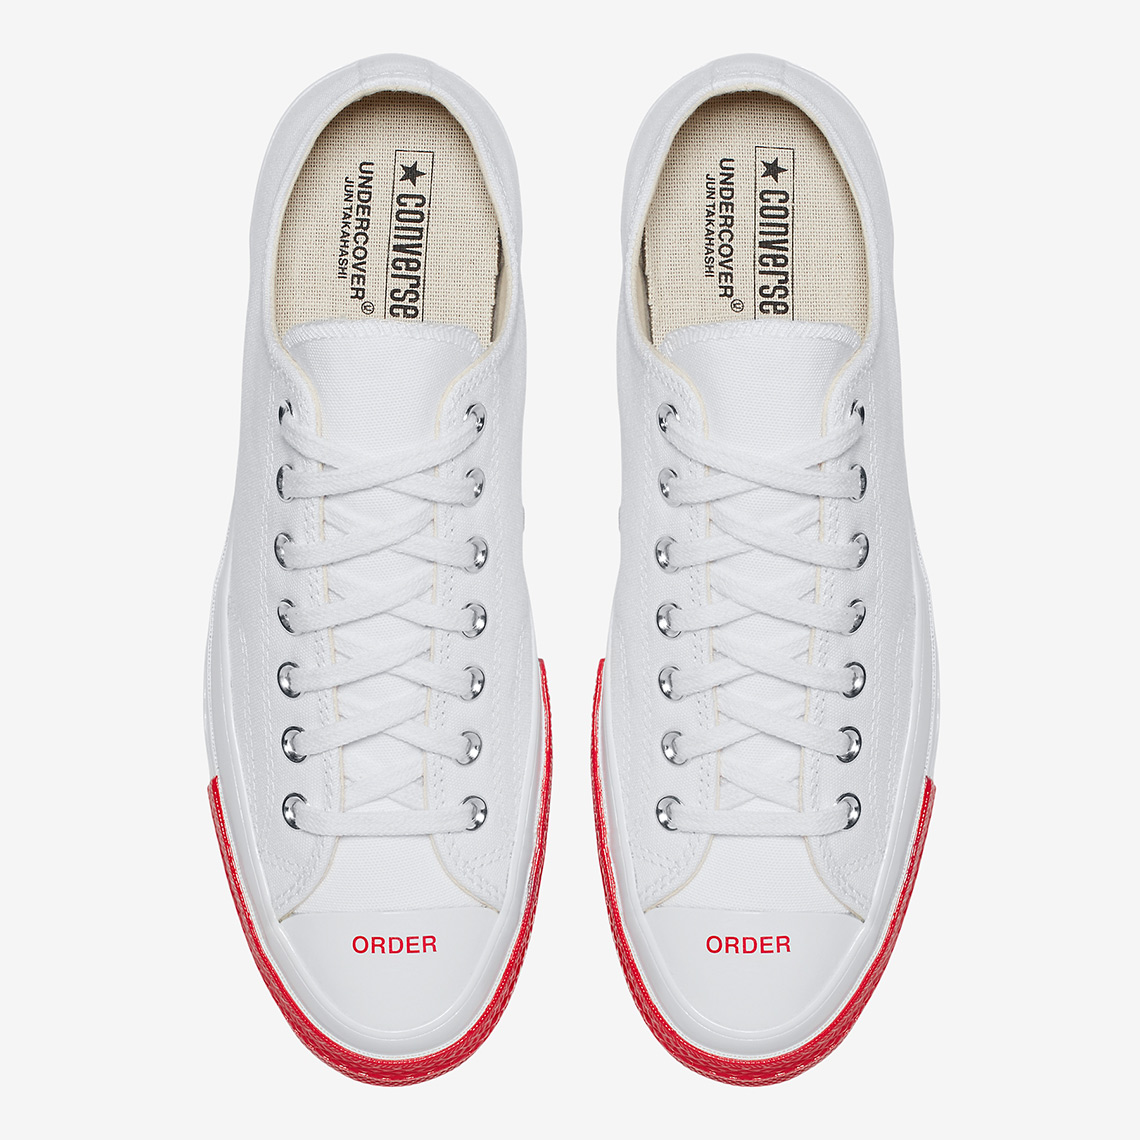 Undercover Converse Chuck 70 Low White Red 2